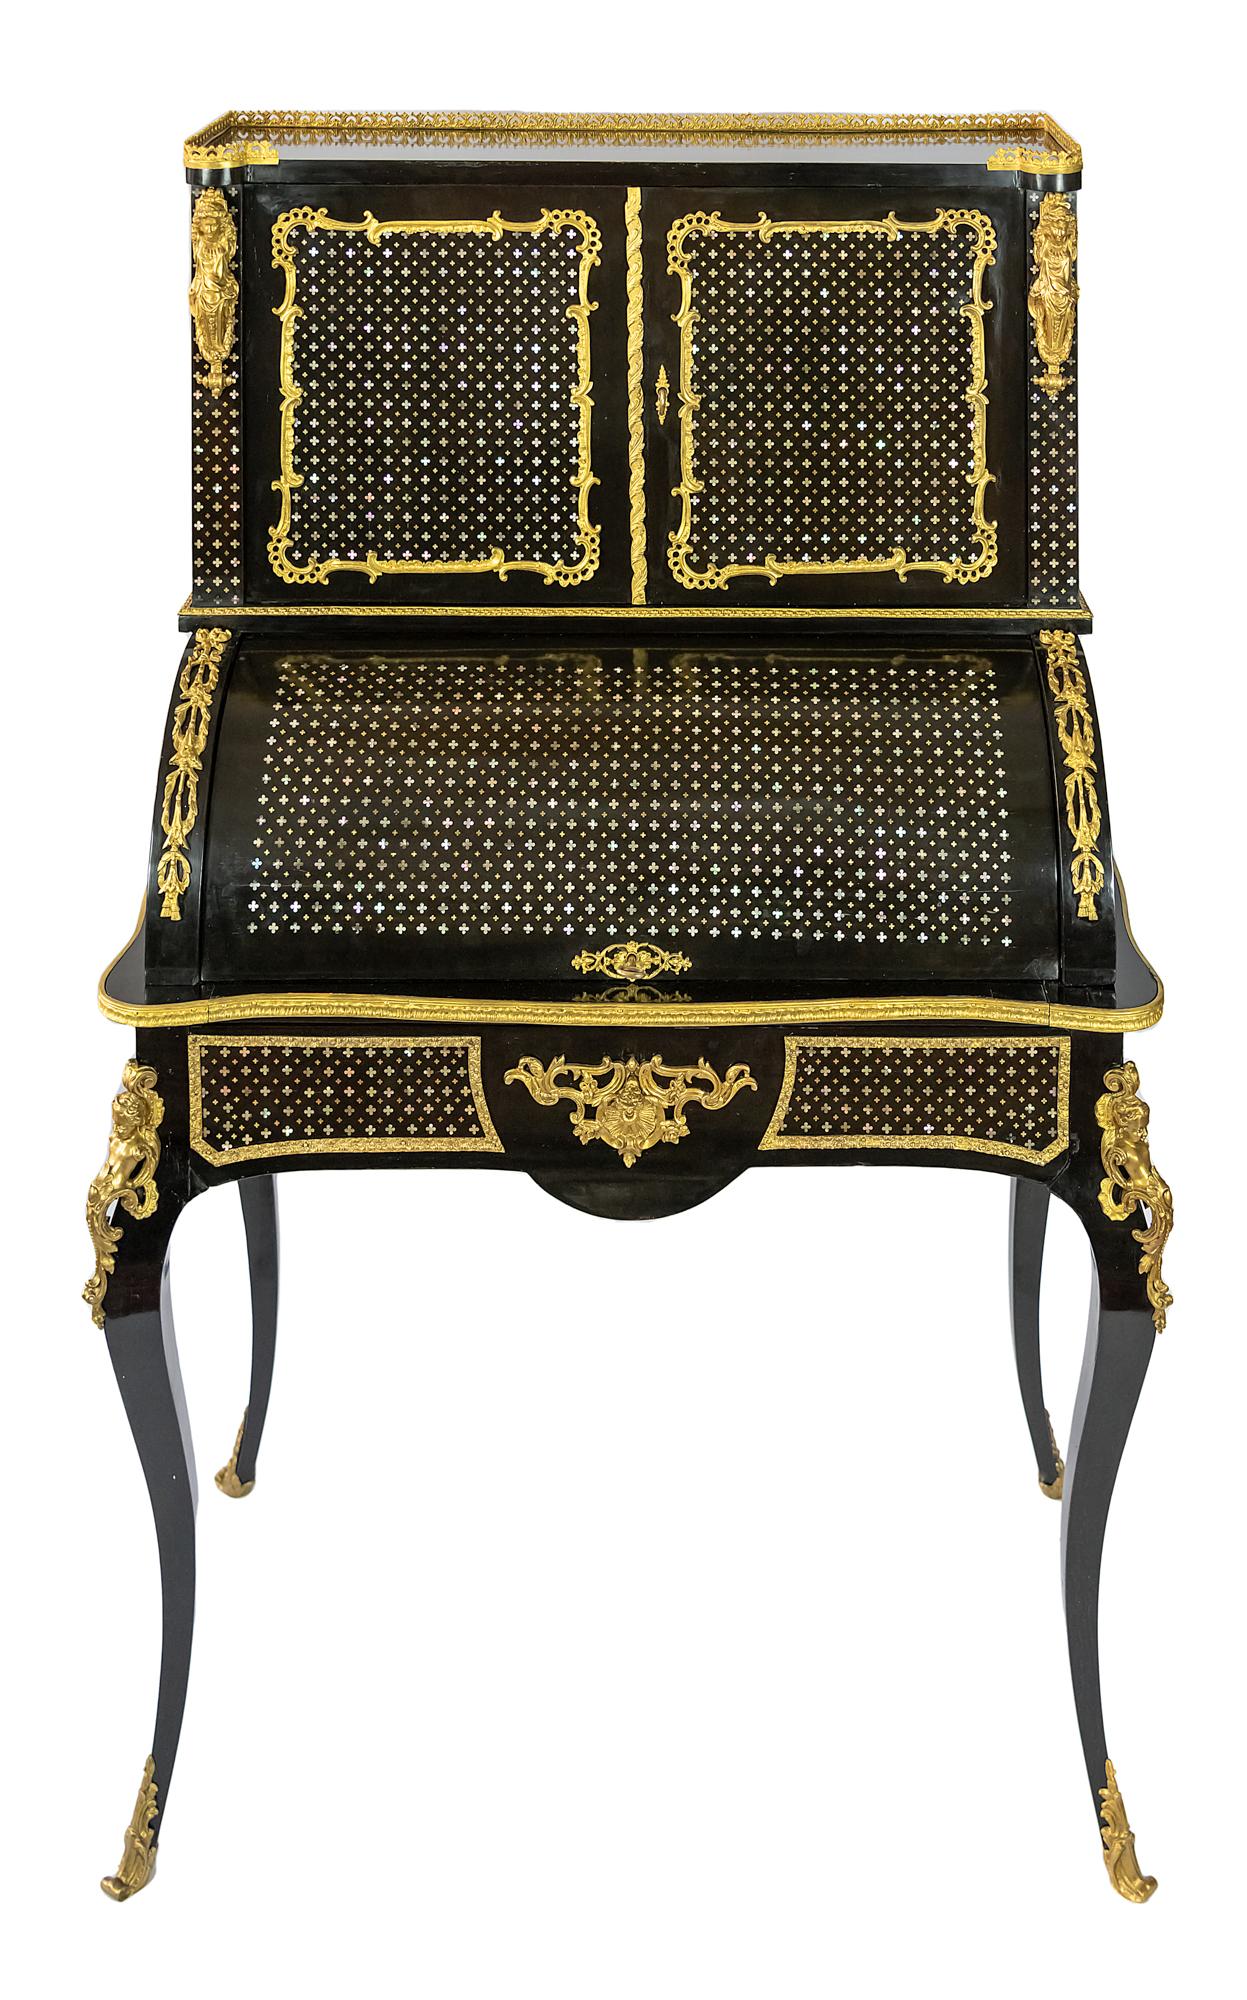 19th century French antique secretaire in black polished wood and verneer by Alphonse Giroux et Cie. Paris. 
The surface is decorated with mother of pearl inlay combined with bronze elements.
The table drawer with a sliding element inside covered